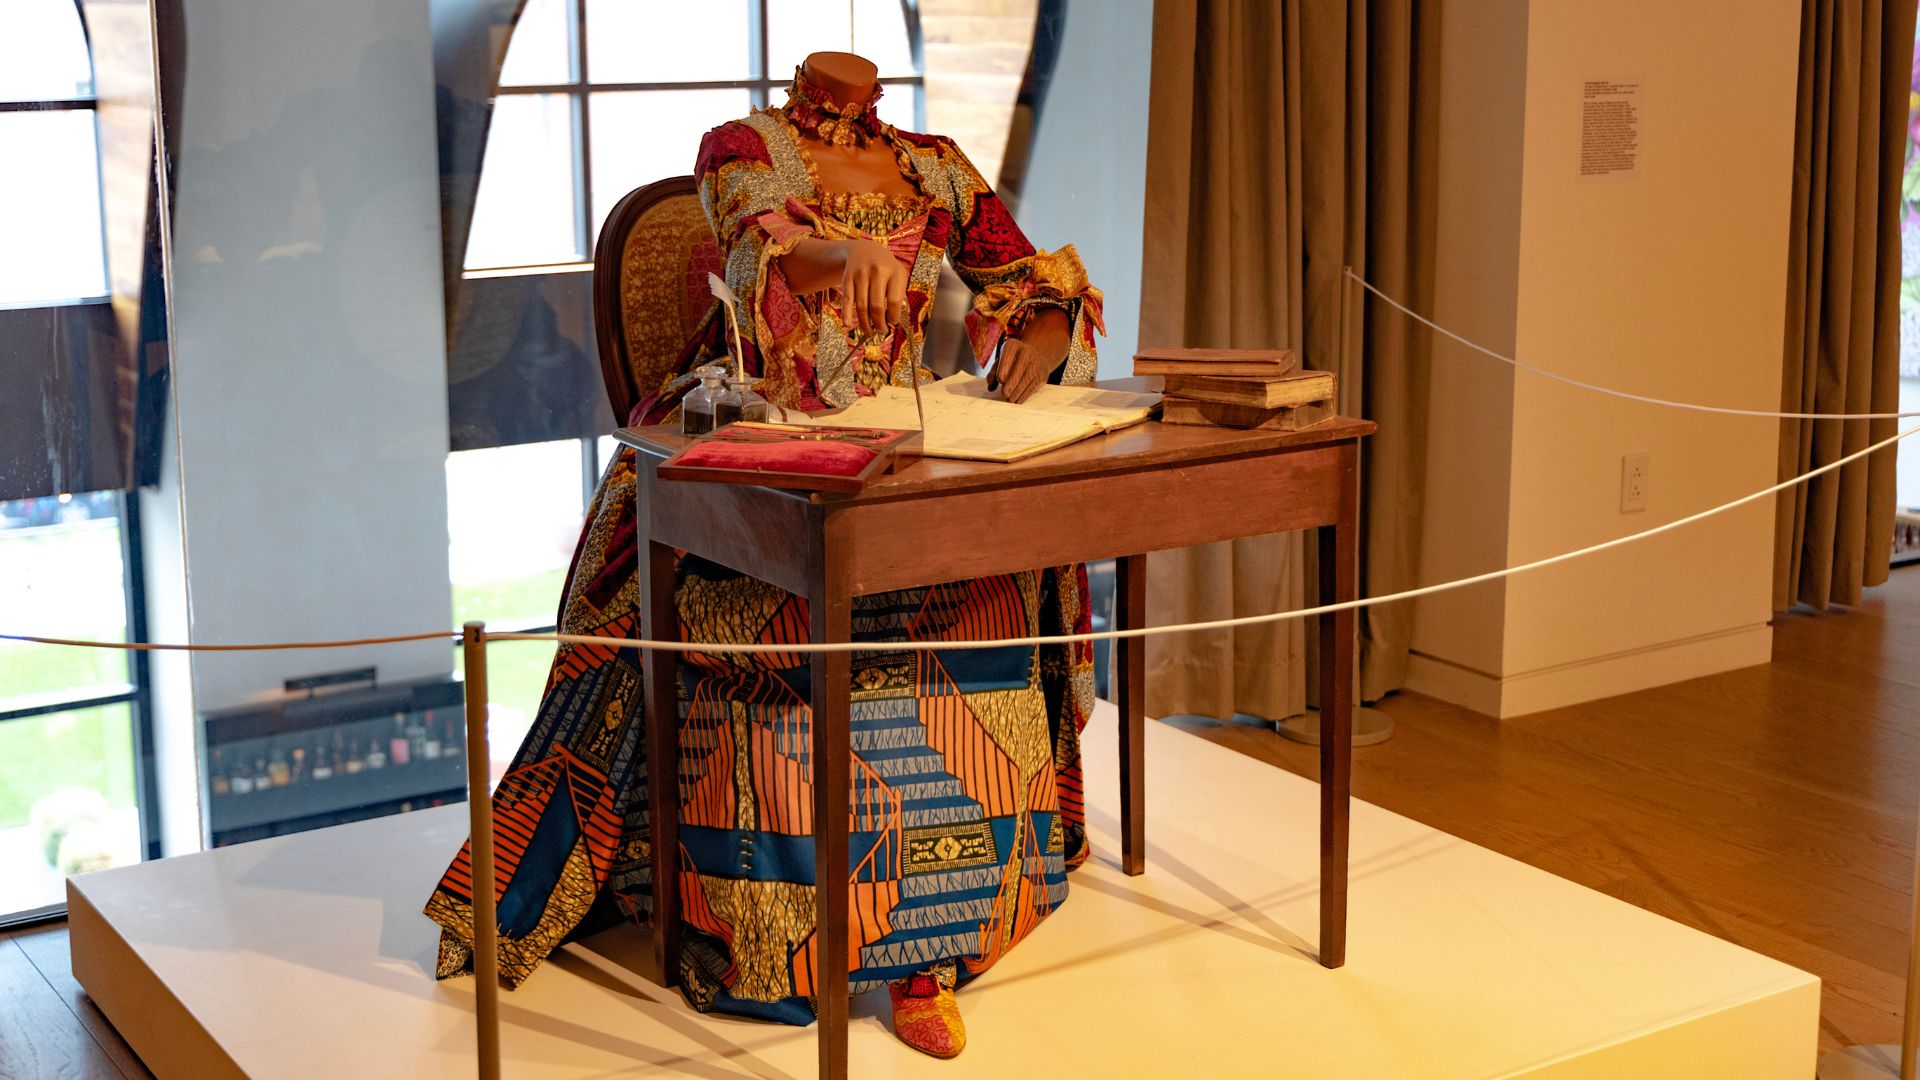 Yinka Shonibare CBE RA's The Marquise du Châtelet features a life-size headless woman sitting at a desk.